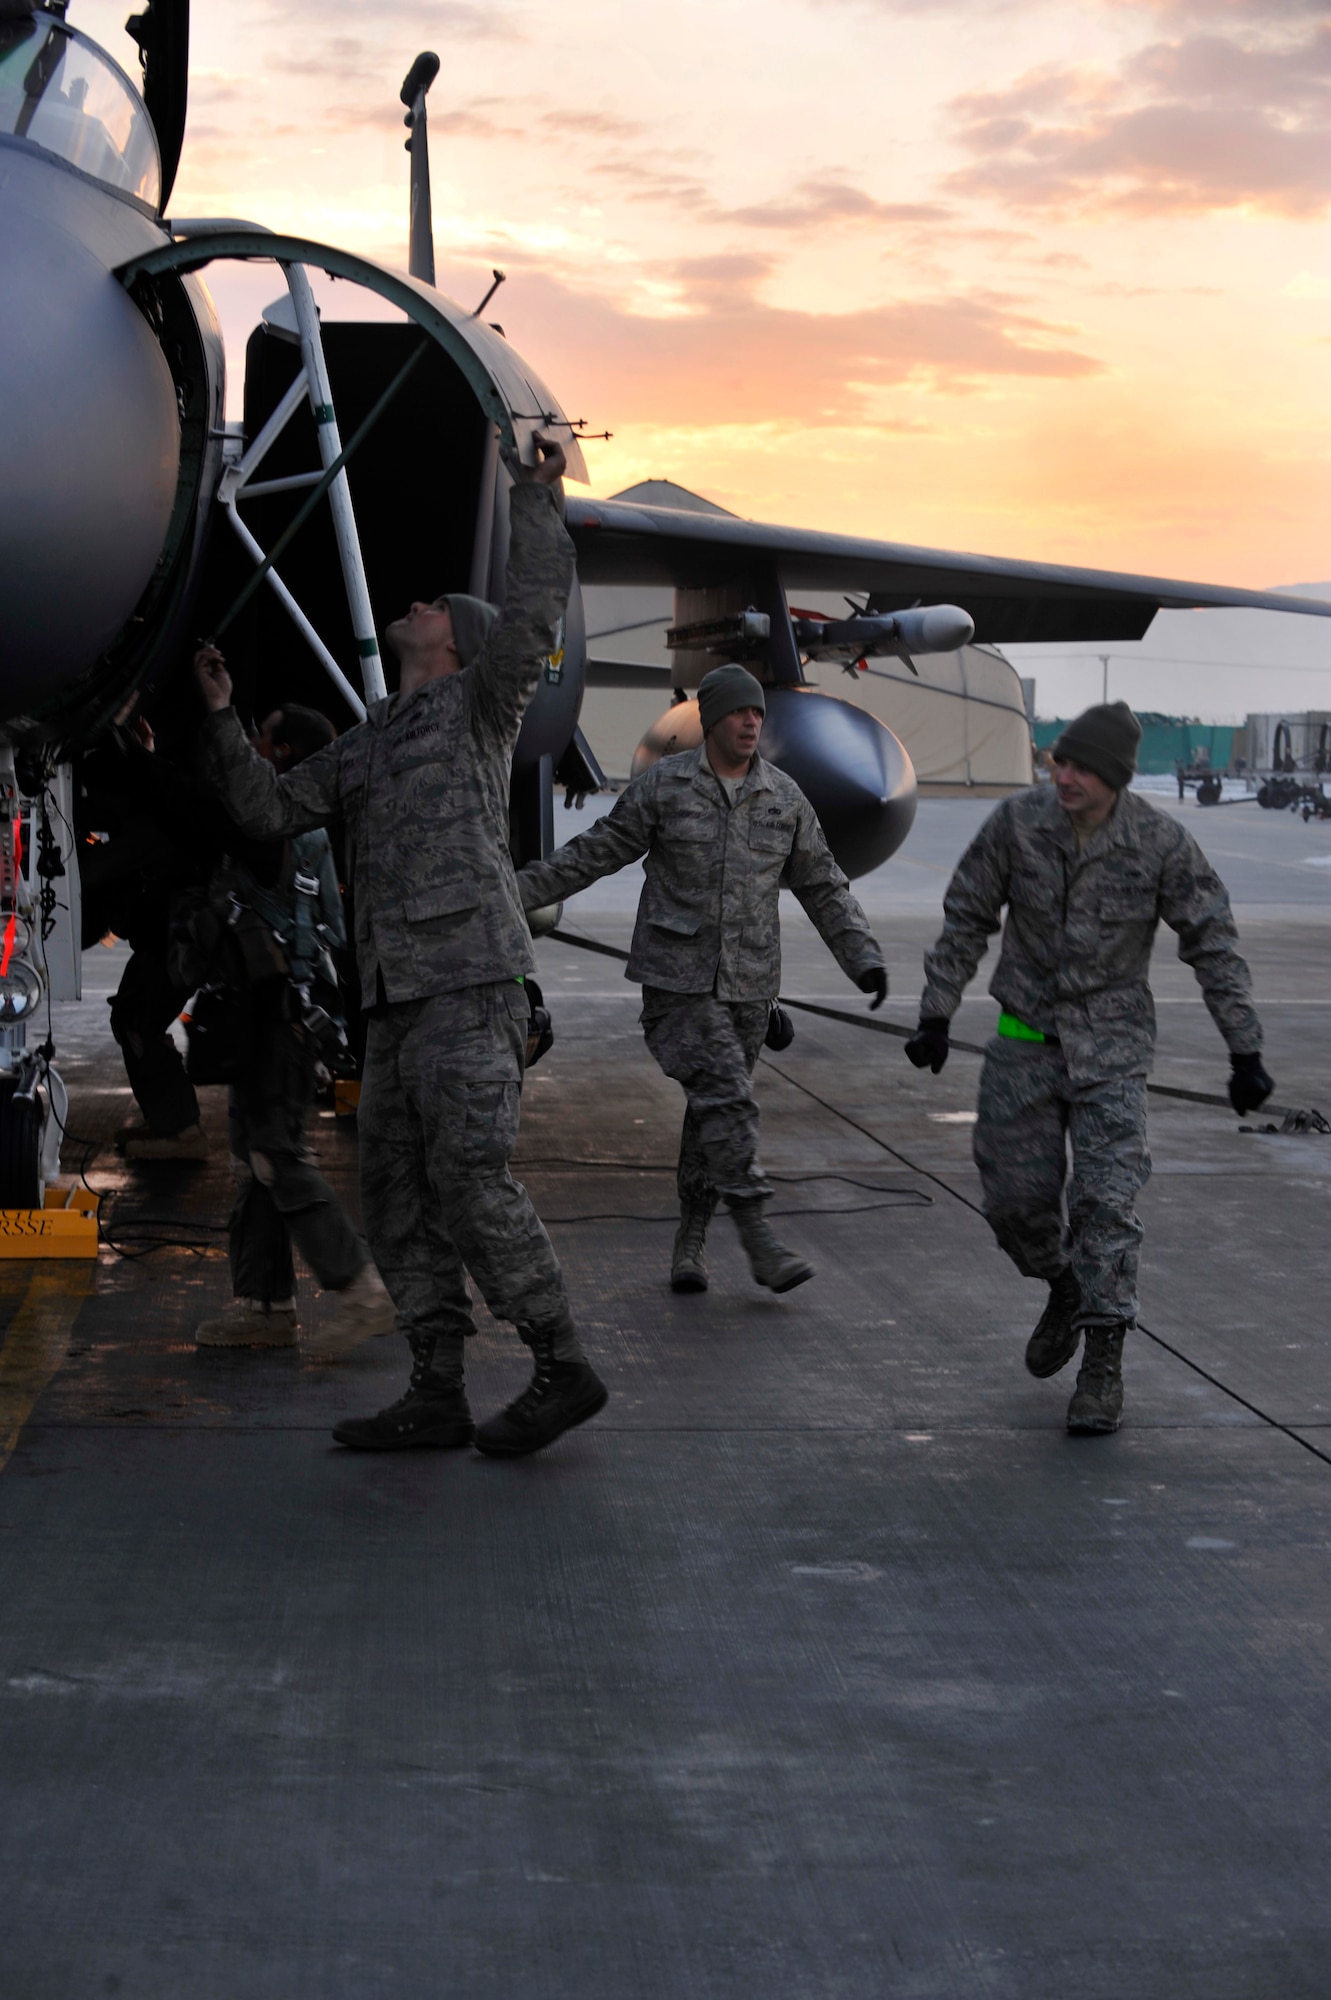 BAGRAM AIRFIELD, Afghanistan—Staff Sgt. Ryan Forsse, Senior Airman Eric Rock and Airman 1st Class Joshua Meints perform the final pre-flight maintenance inspection on F-15E Strike Eagle #89-0487 before it goes on the mission that will bring it’s flying hours up to 10,000 at Bagram Airfield, Afghanistan, Jan. 13, 2012. Forsse, Rock, and Meints are all crew chiefs with the 455th Expeditionary Aircraft Maintenance Squadron and are deployed from Seymour-Johnson Air Force Base, N.C. (U.S. Air Force photo/ Airman 1st Class Ericka Engblom)